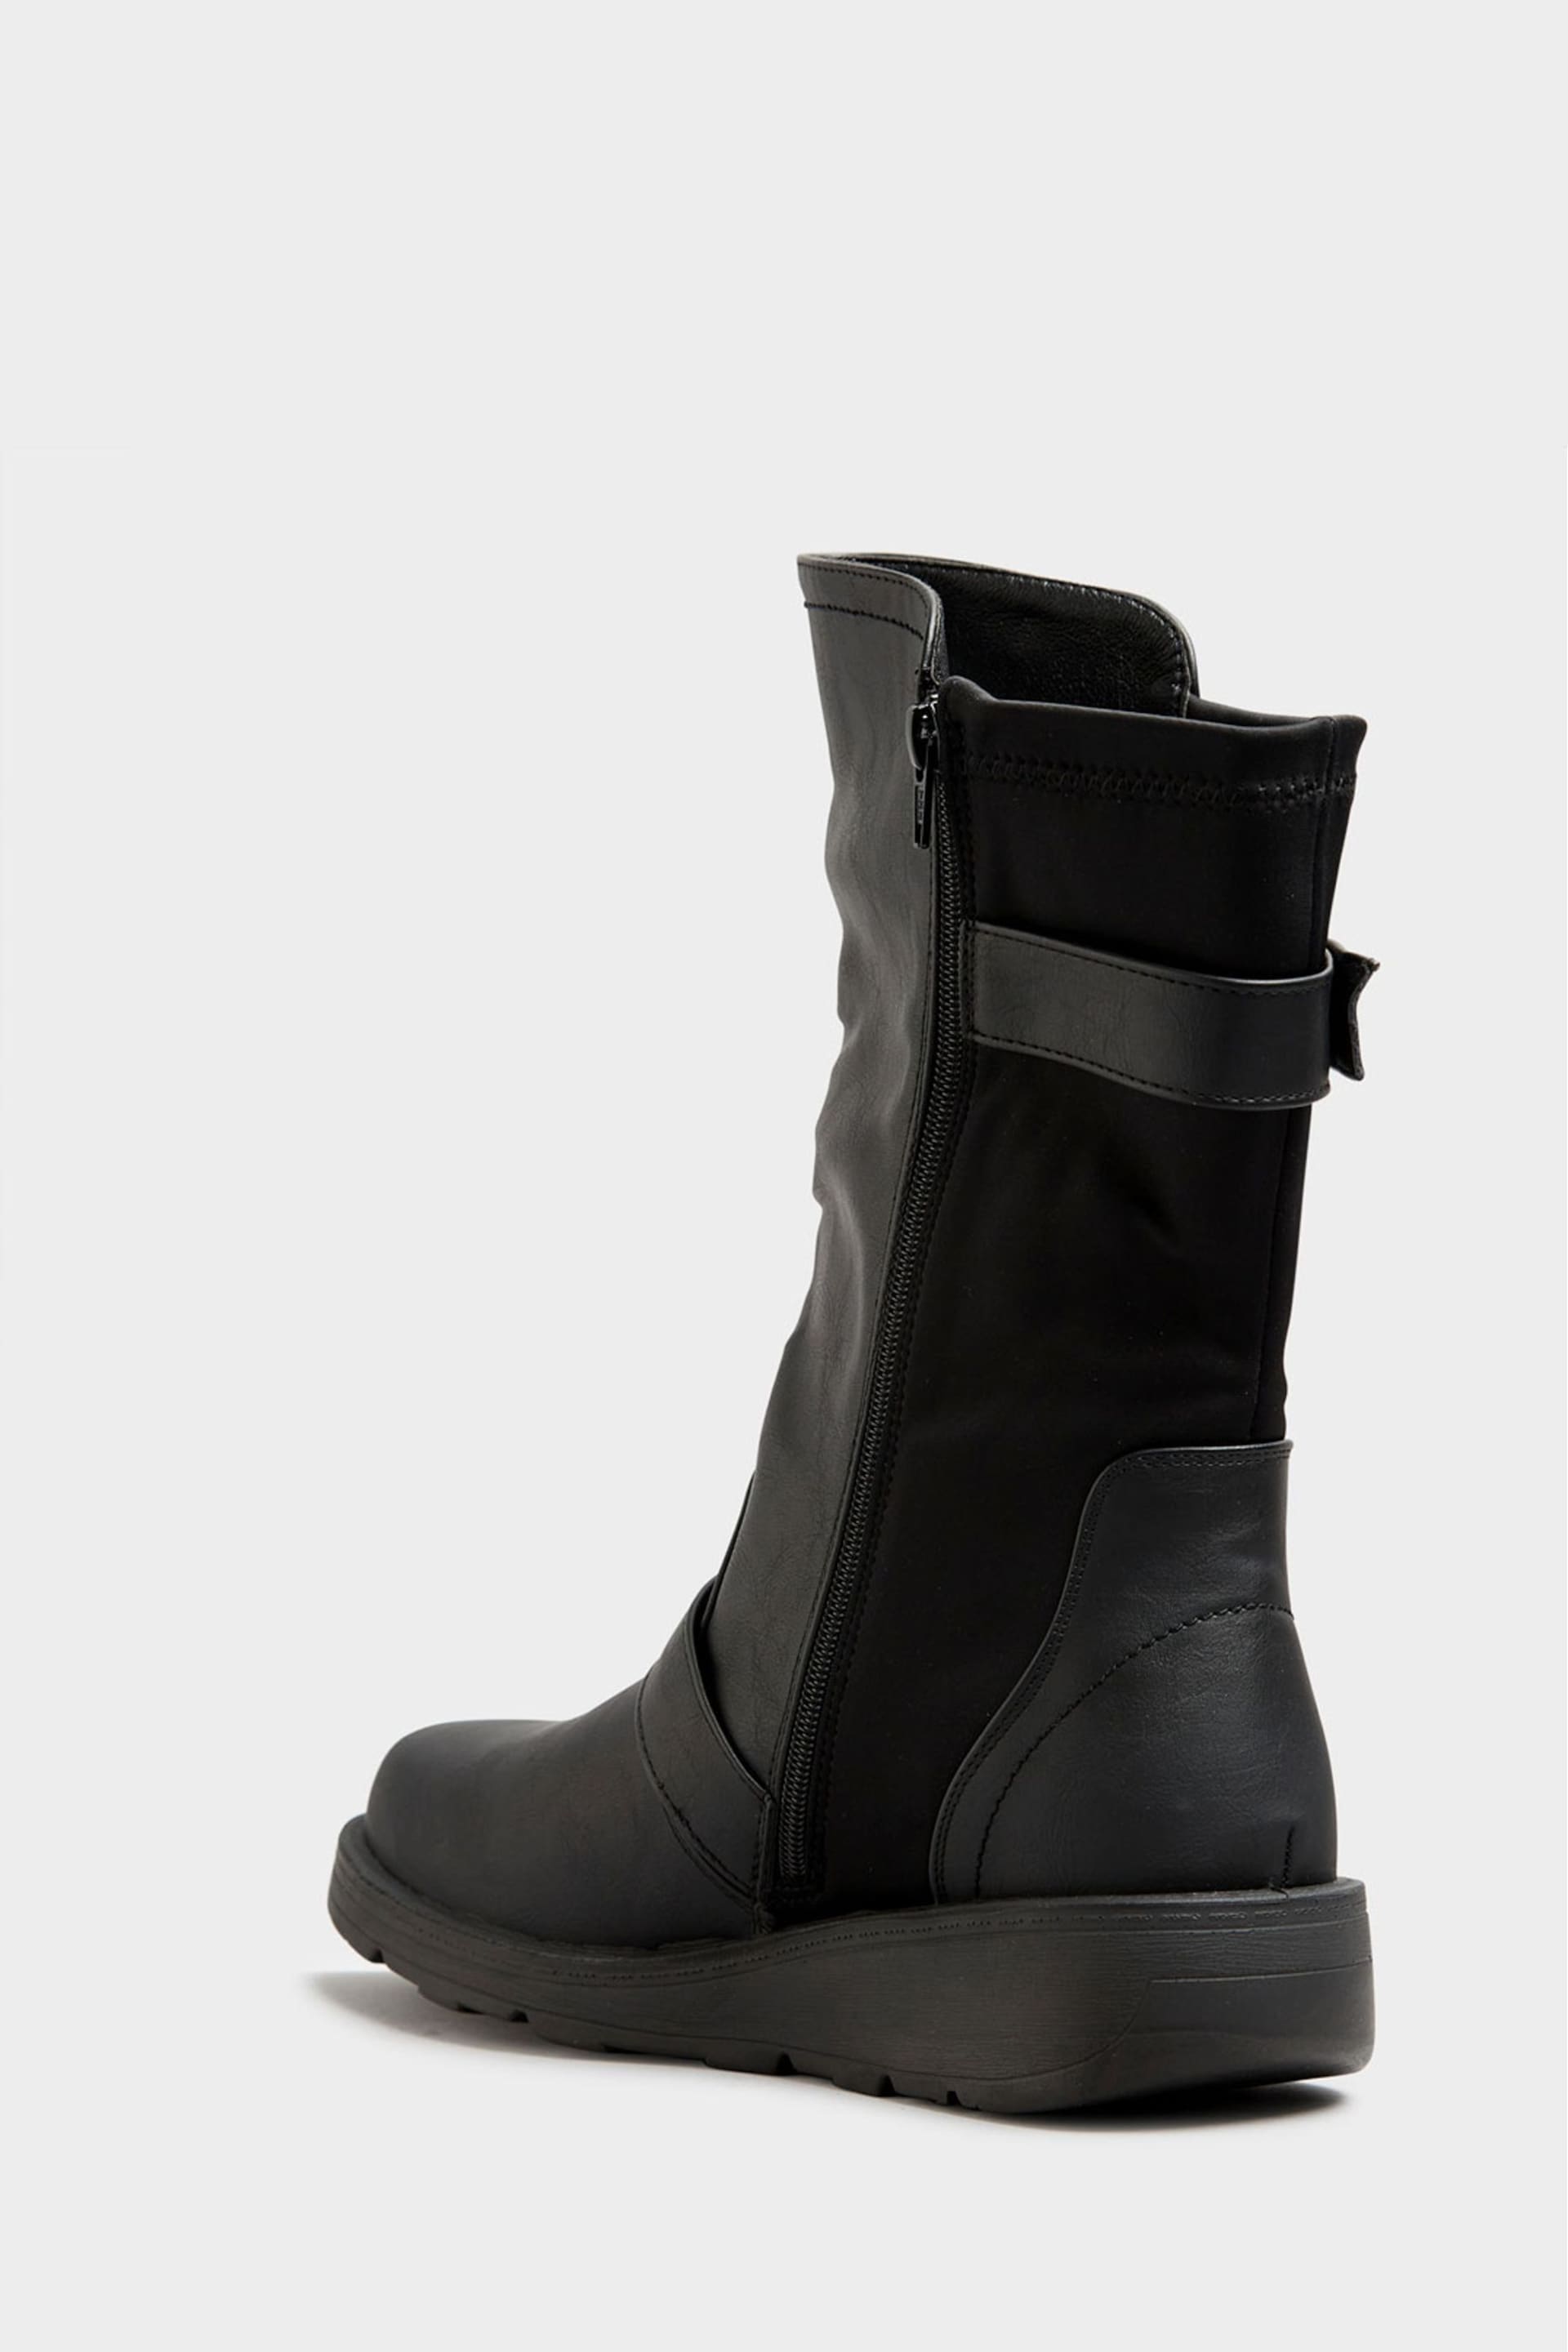 Yours Curve Black Extra Wide Fit Low Wedge Buckle Boots - Image 3 of 4